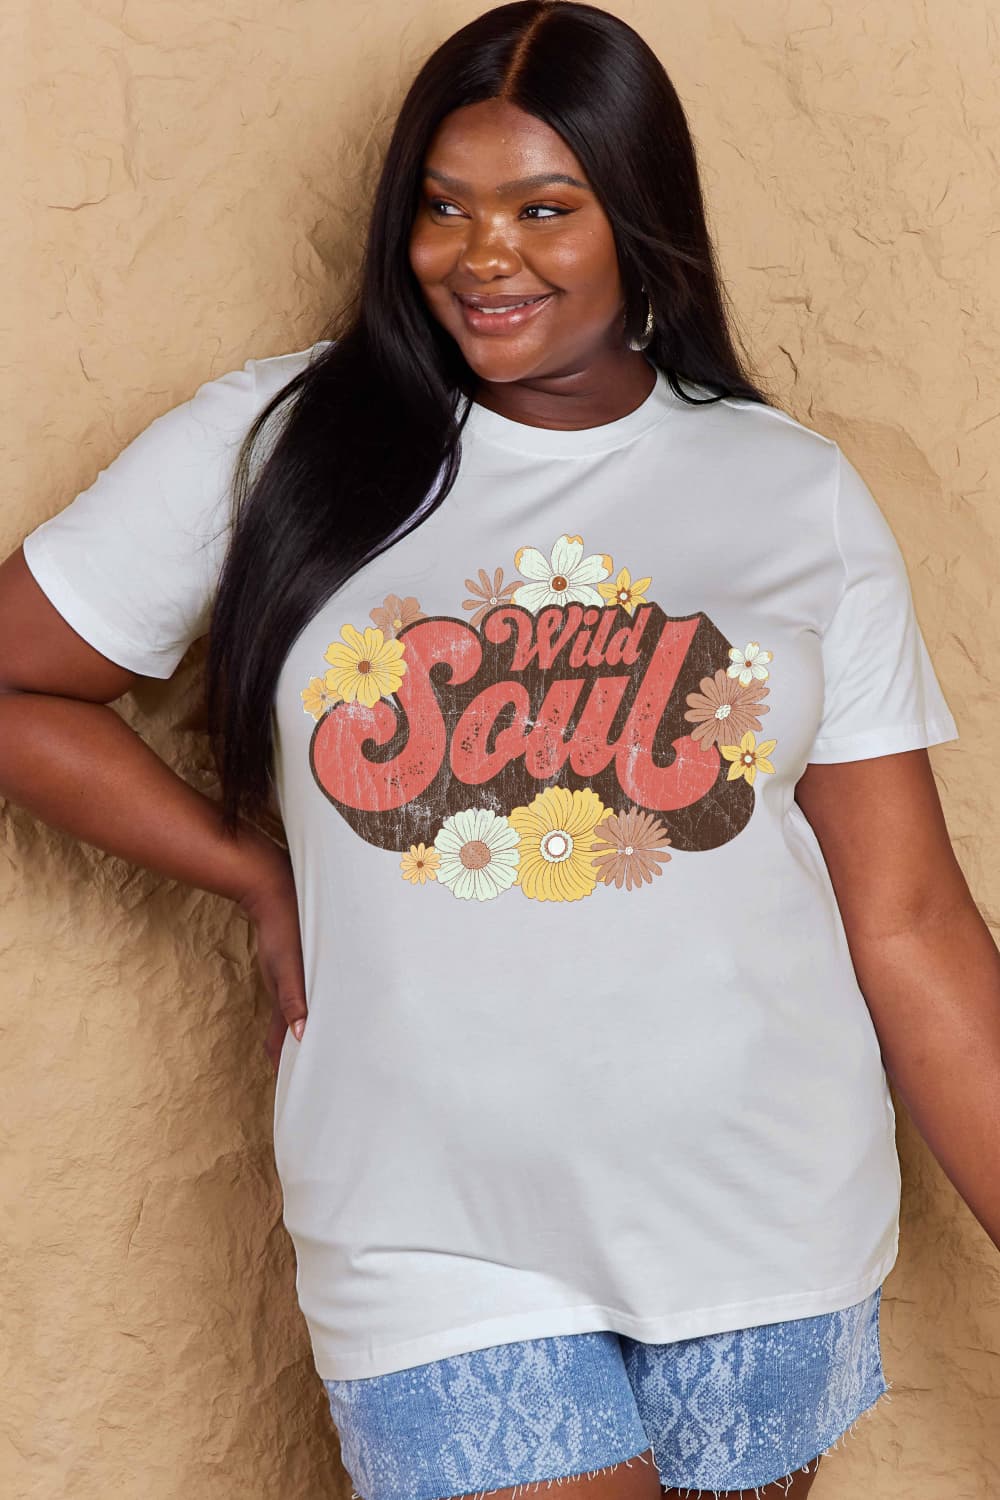 PREORDER- Simply Love Full Size WILD SOUL Graphic Cotton T-Shirt